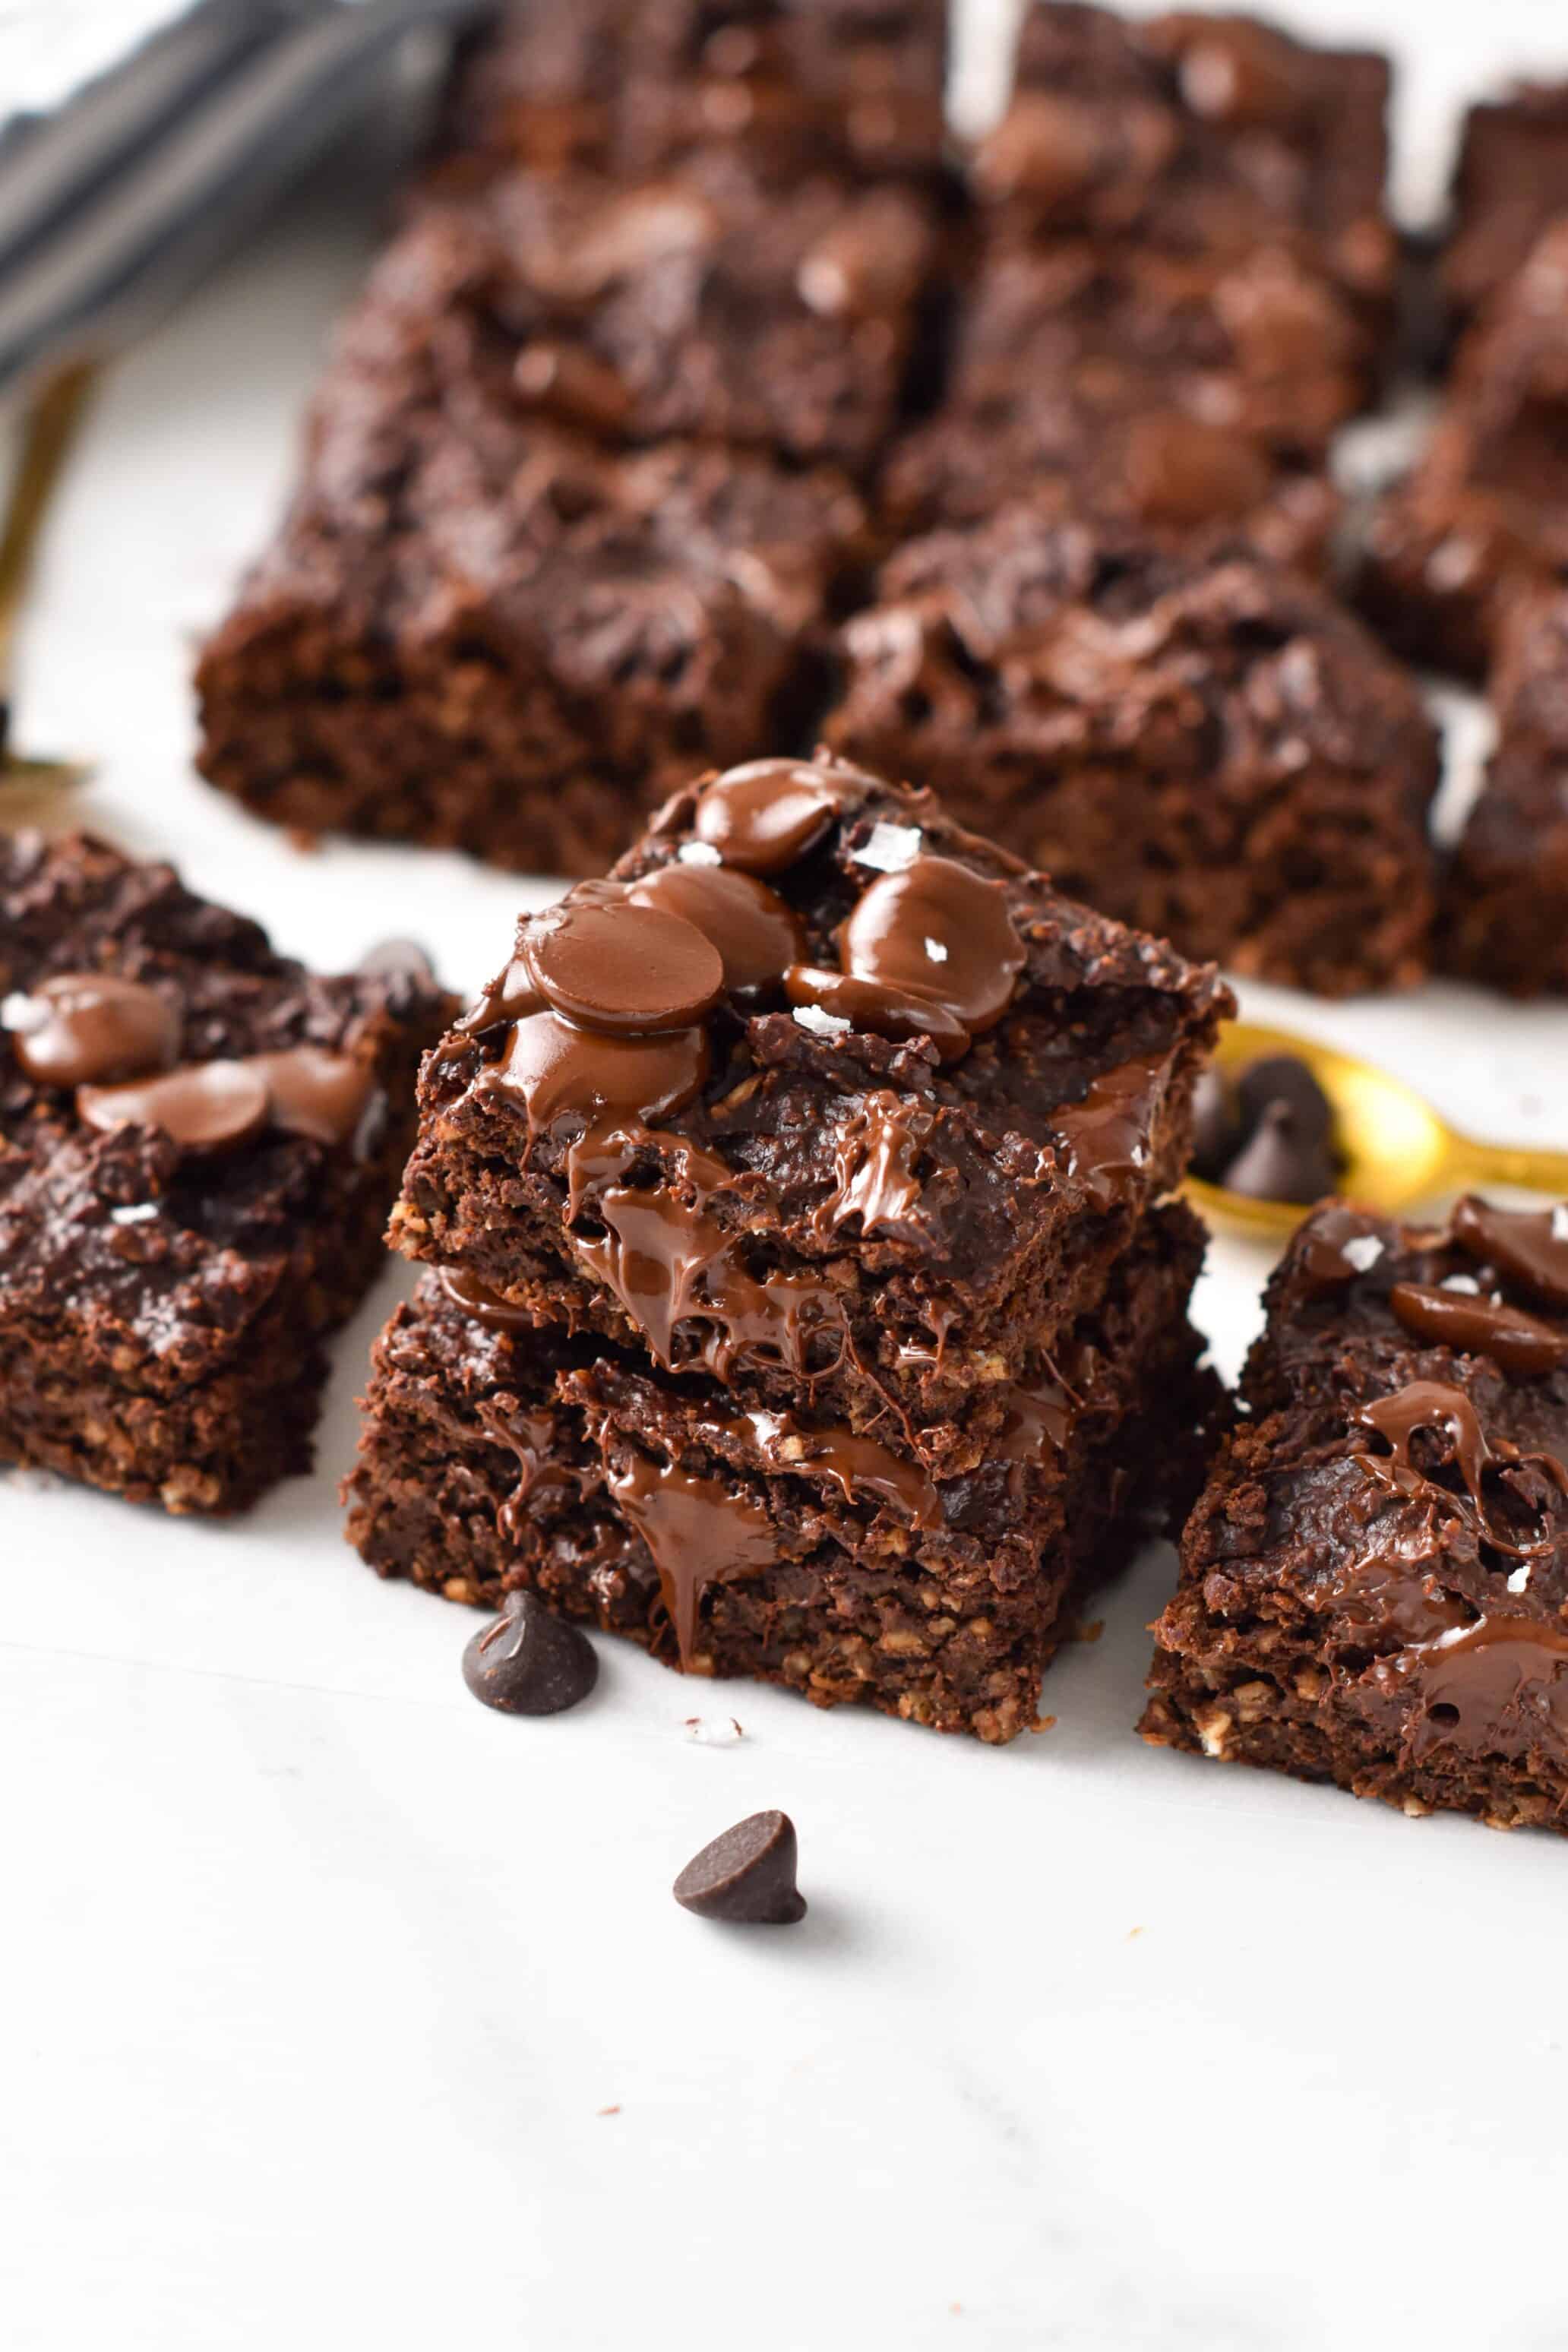 These Plant-Based Yogurt Brownies are oil-free brownies simply made with yogurt instead of oil or plant-based butter. Plus, they are also refined sugar-free, and packed with whole grains from oats.